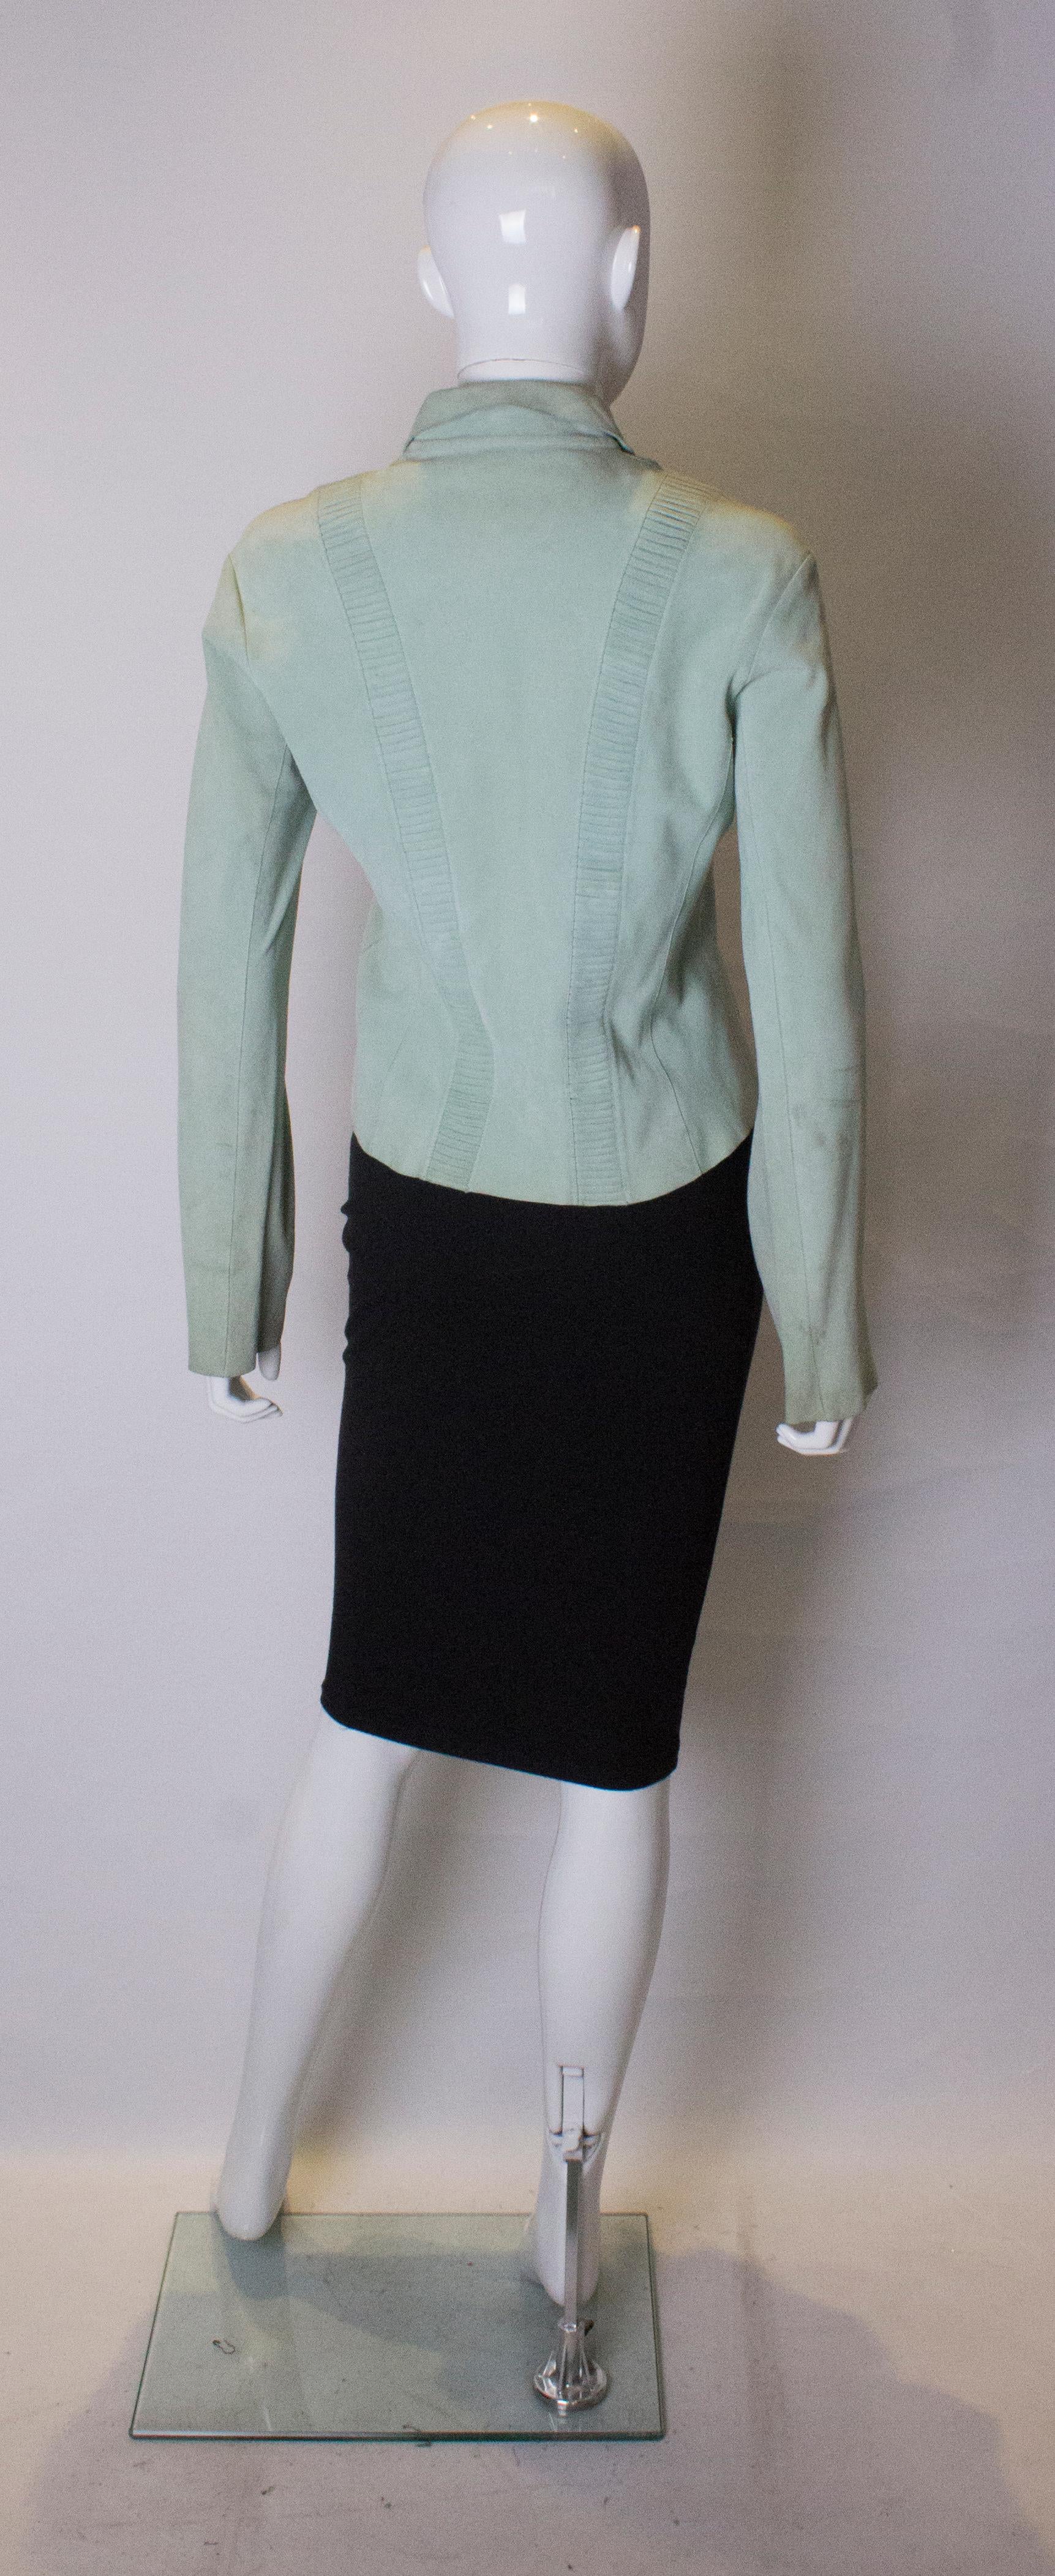 A chic peppermint green shirt in super soft suede. The shirt has pleat detail on the front and back, and a four button opening at the front.